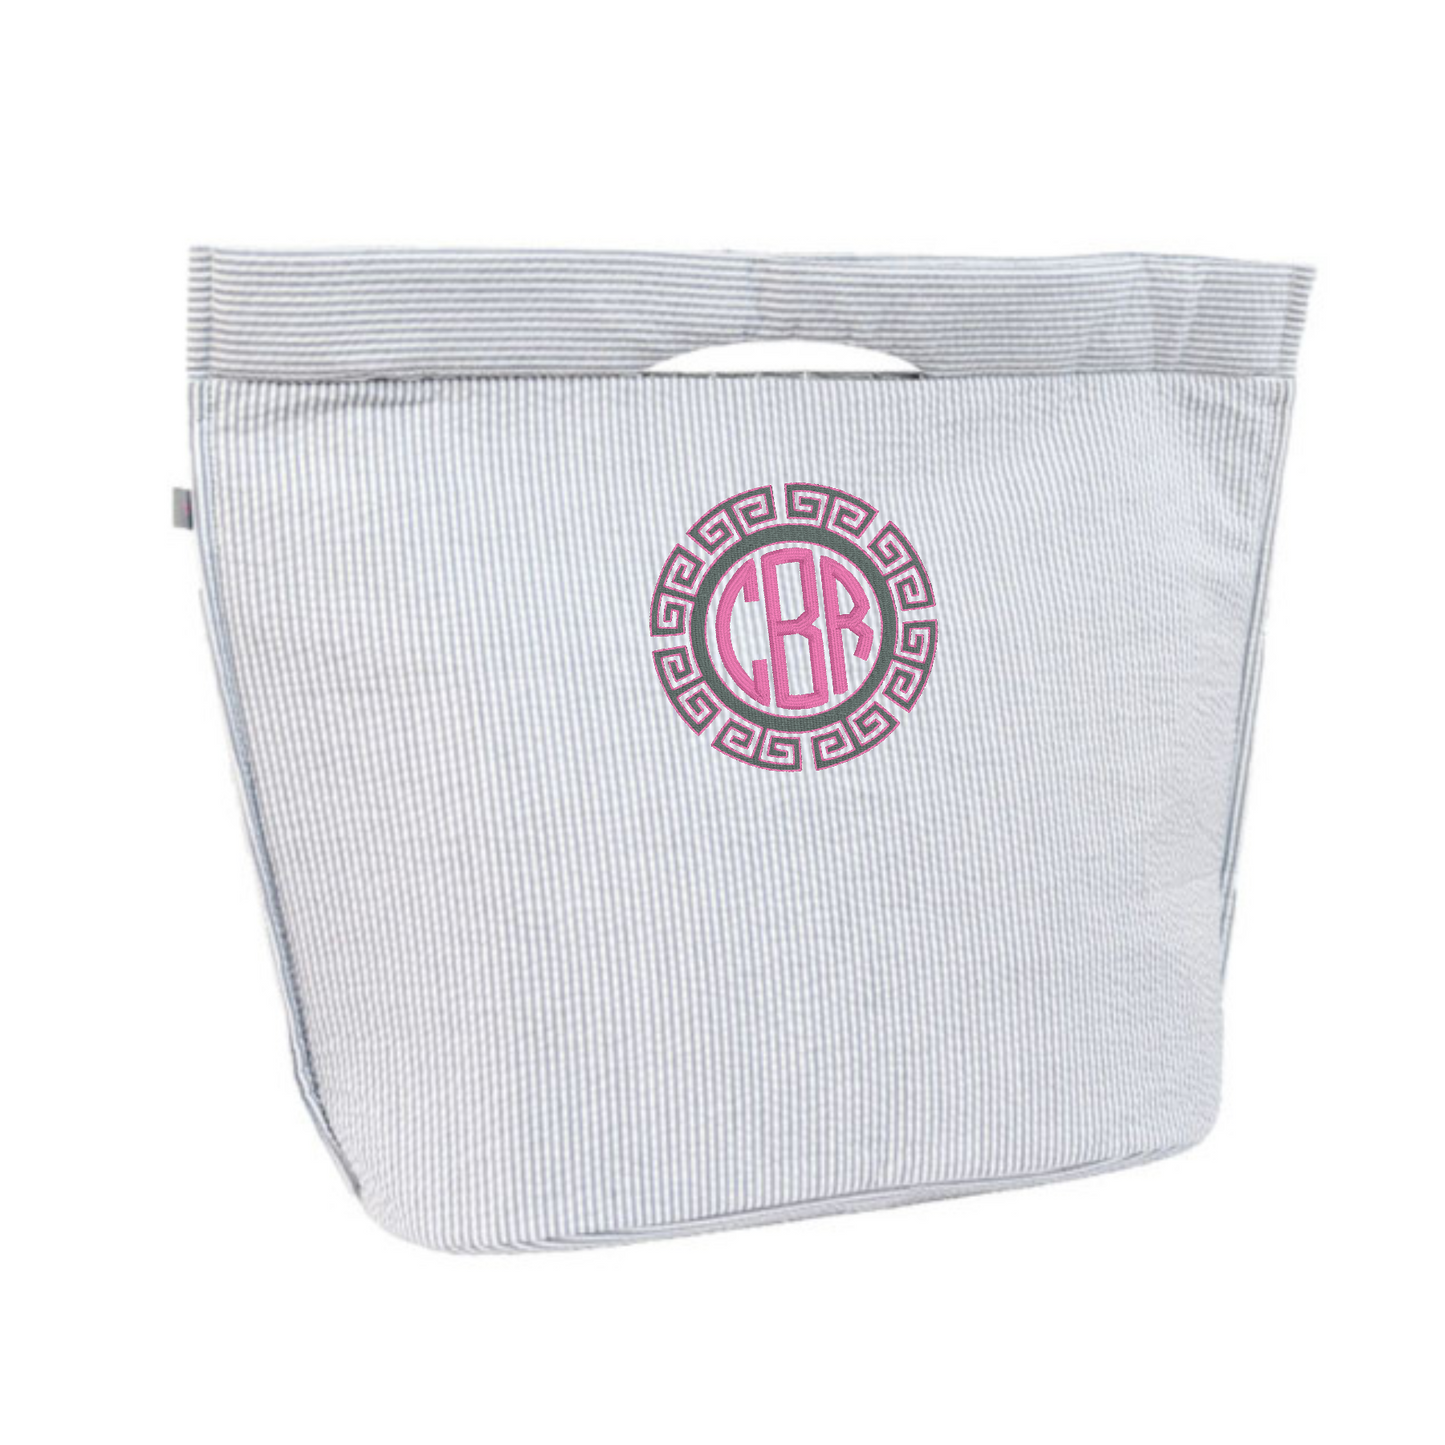 Monogrammed Insulated Tote - Large